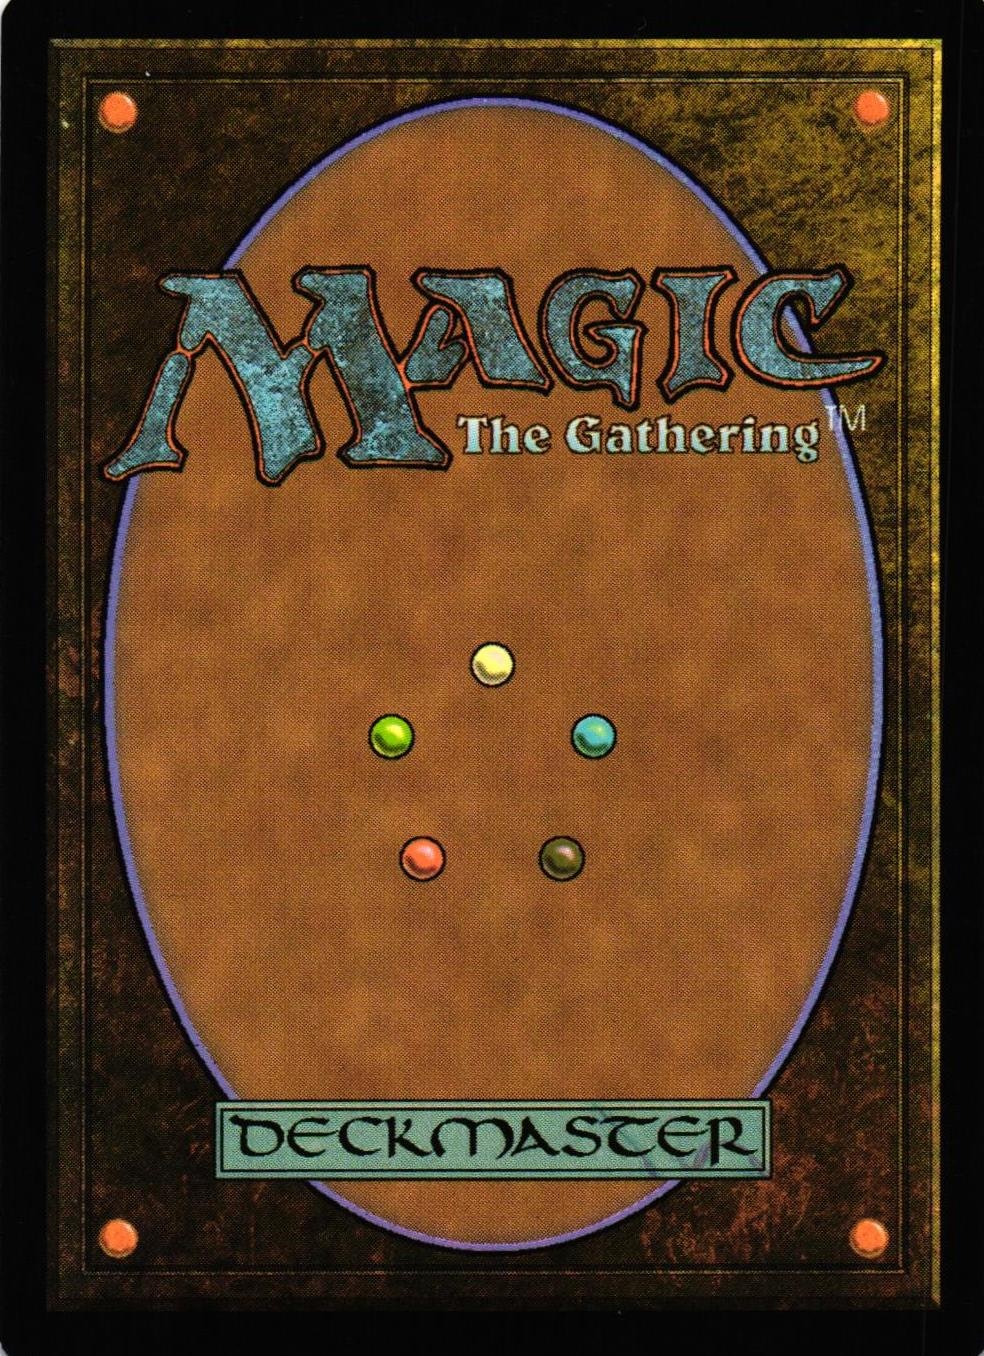 Setessan Griffin Common 30/249 Theros (THS) Magic the Gathering